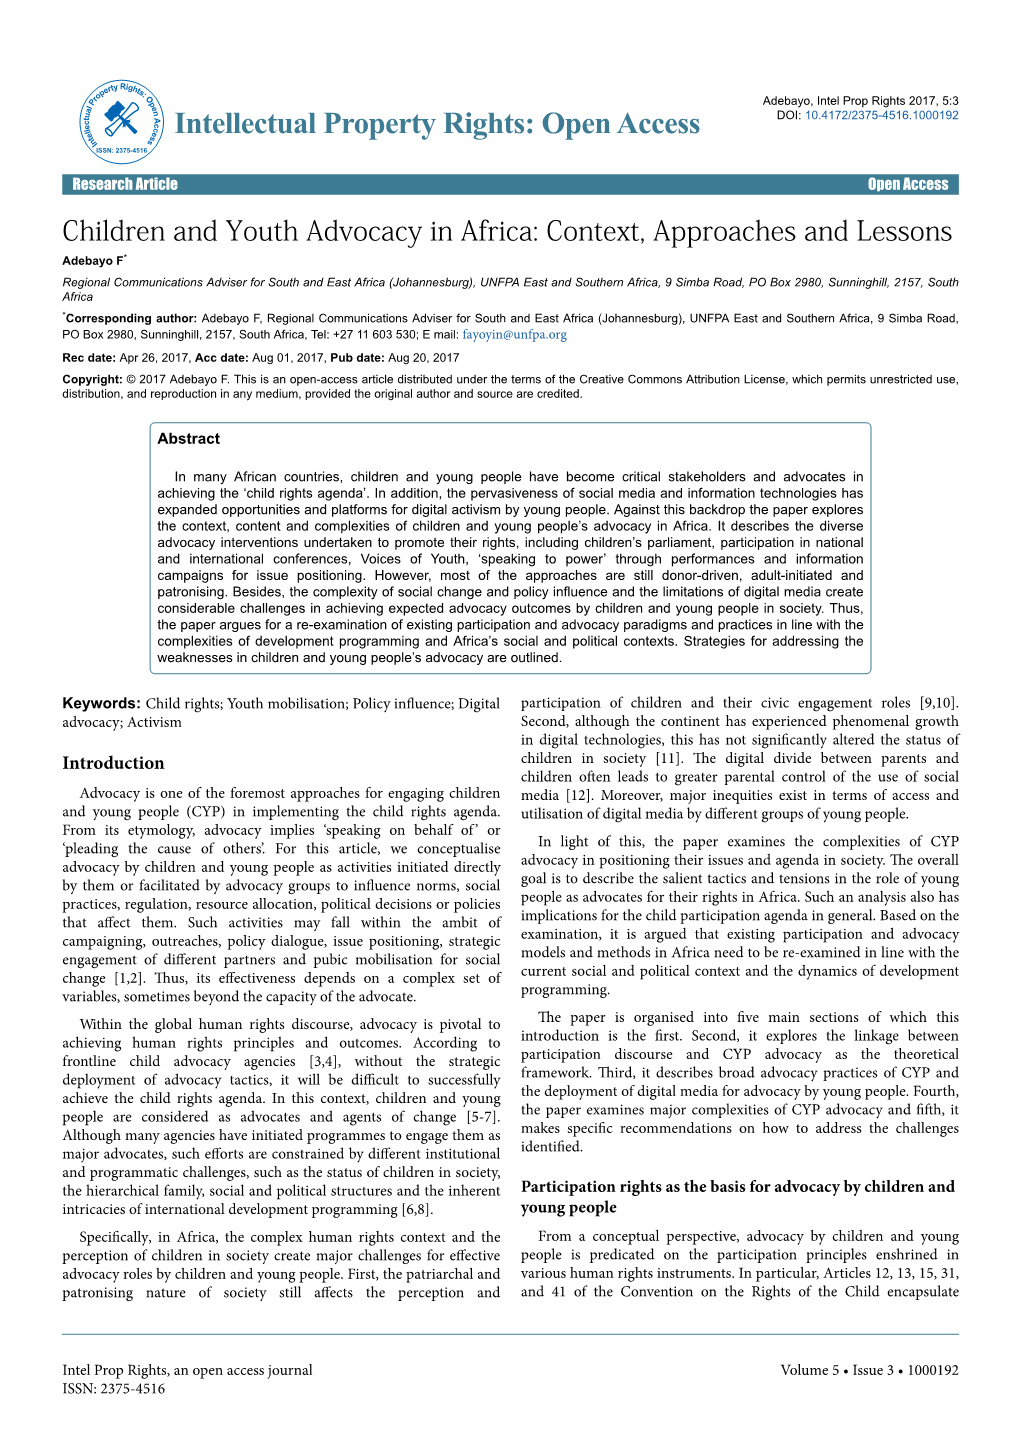 Children and Youth Advocacy in Africa: Context, Approaches and Lessons